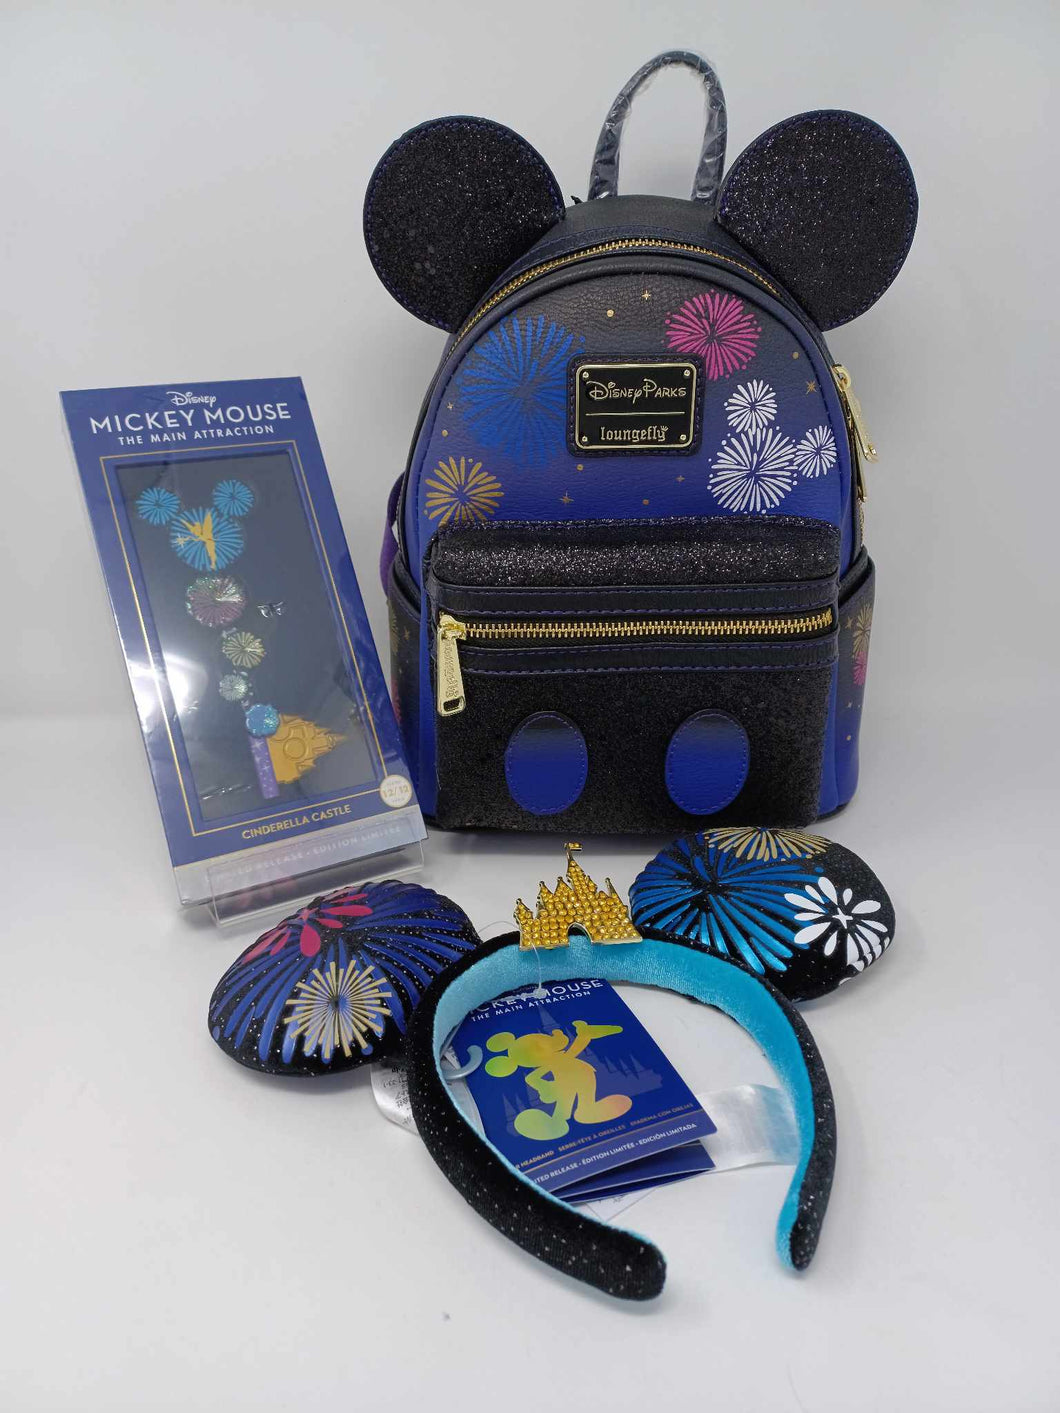 Disney Mini Backpack Ears Key Set Mickey Mouse Cinderella's Castle Main Attraction Fireworks Loungefly